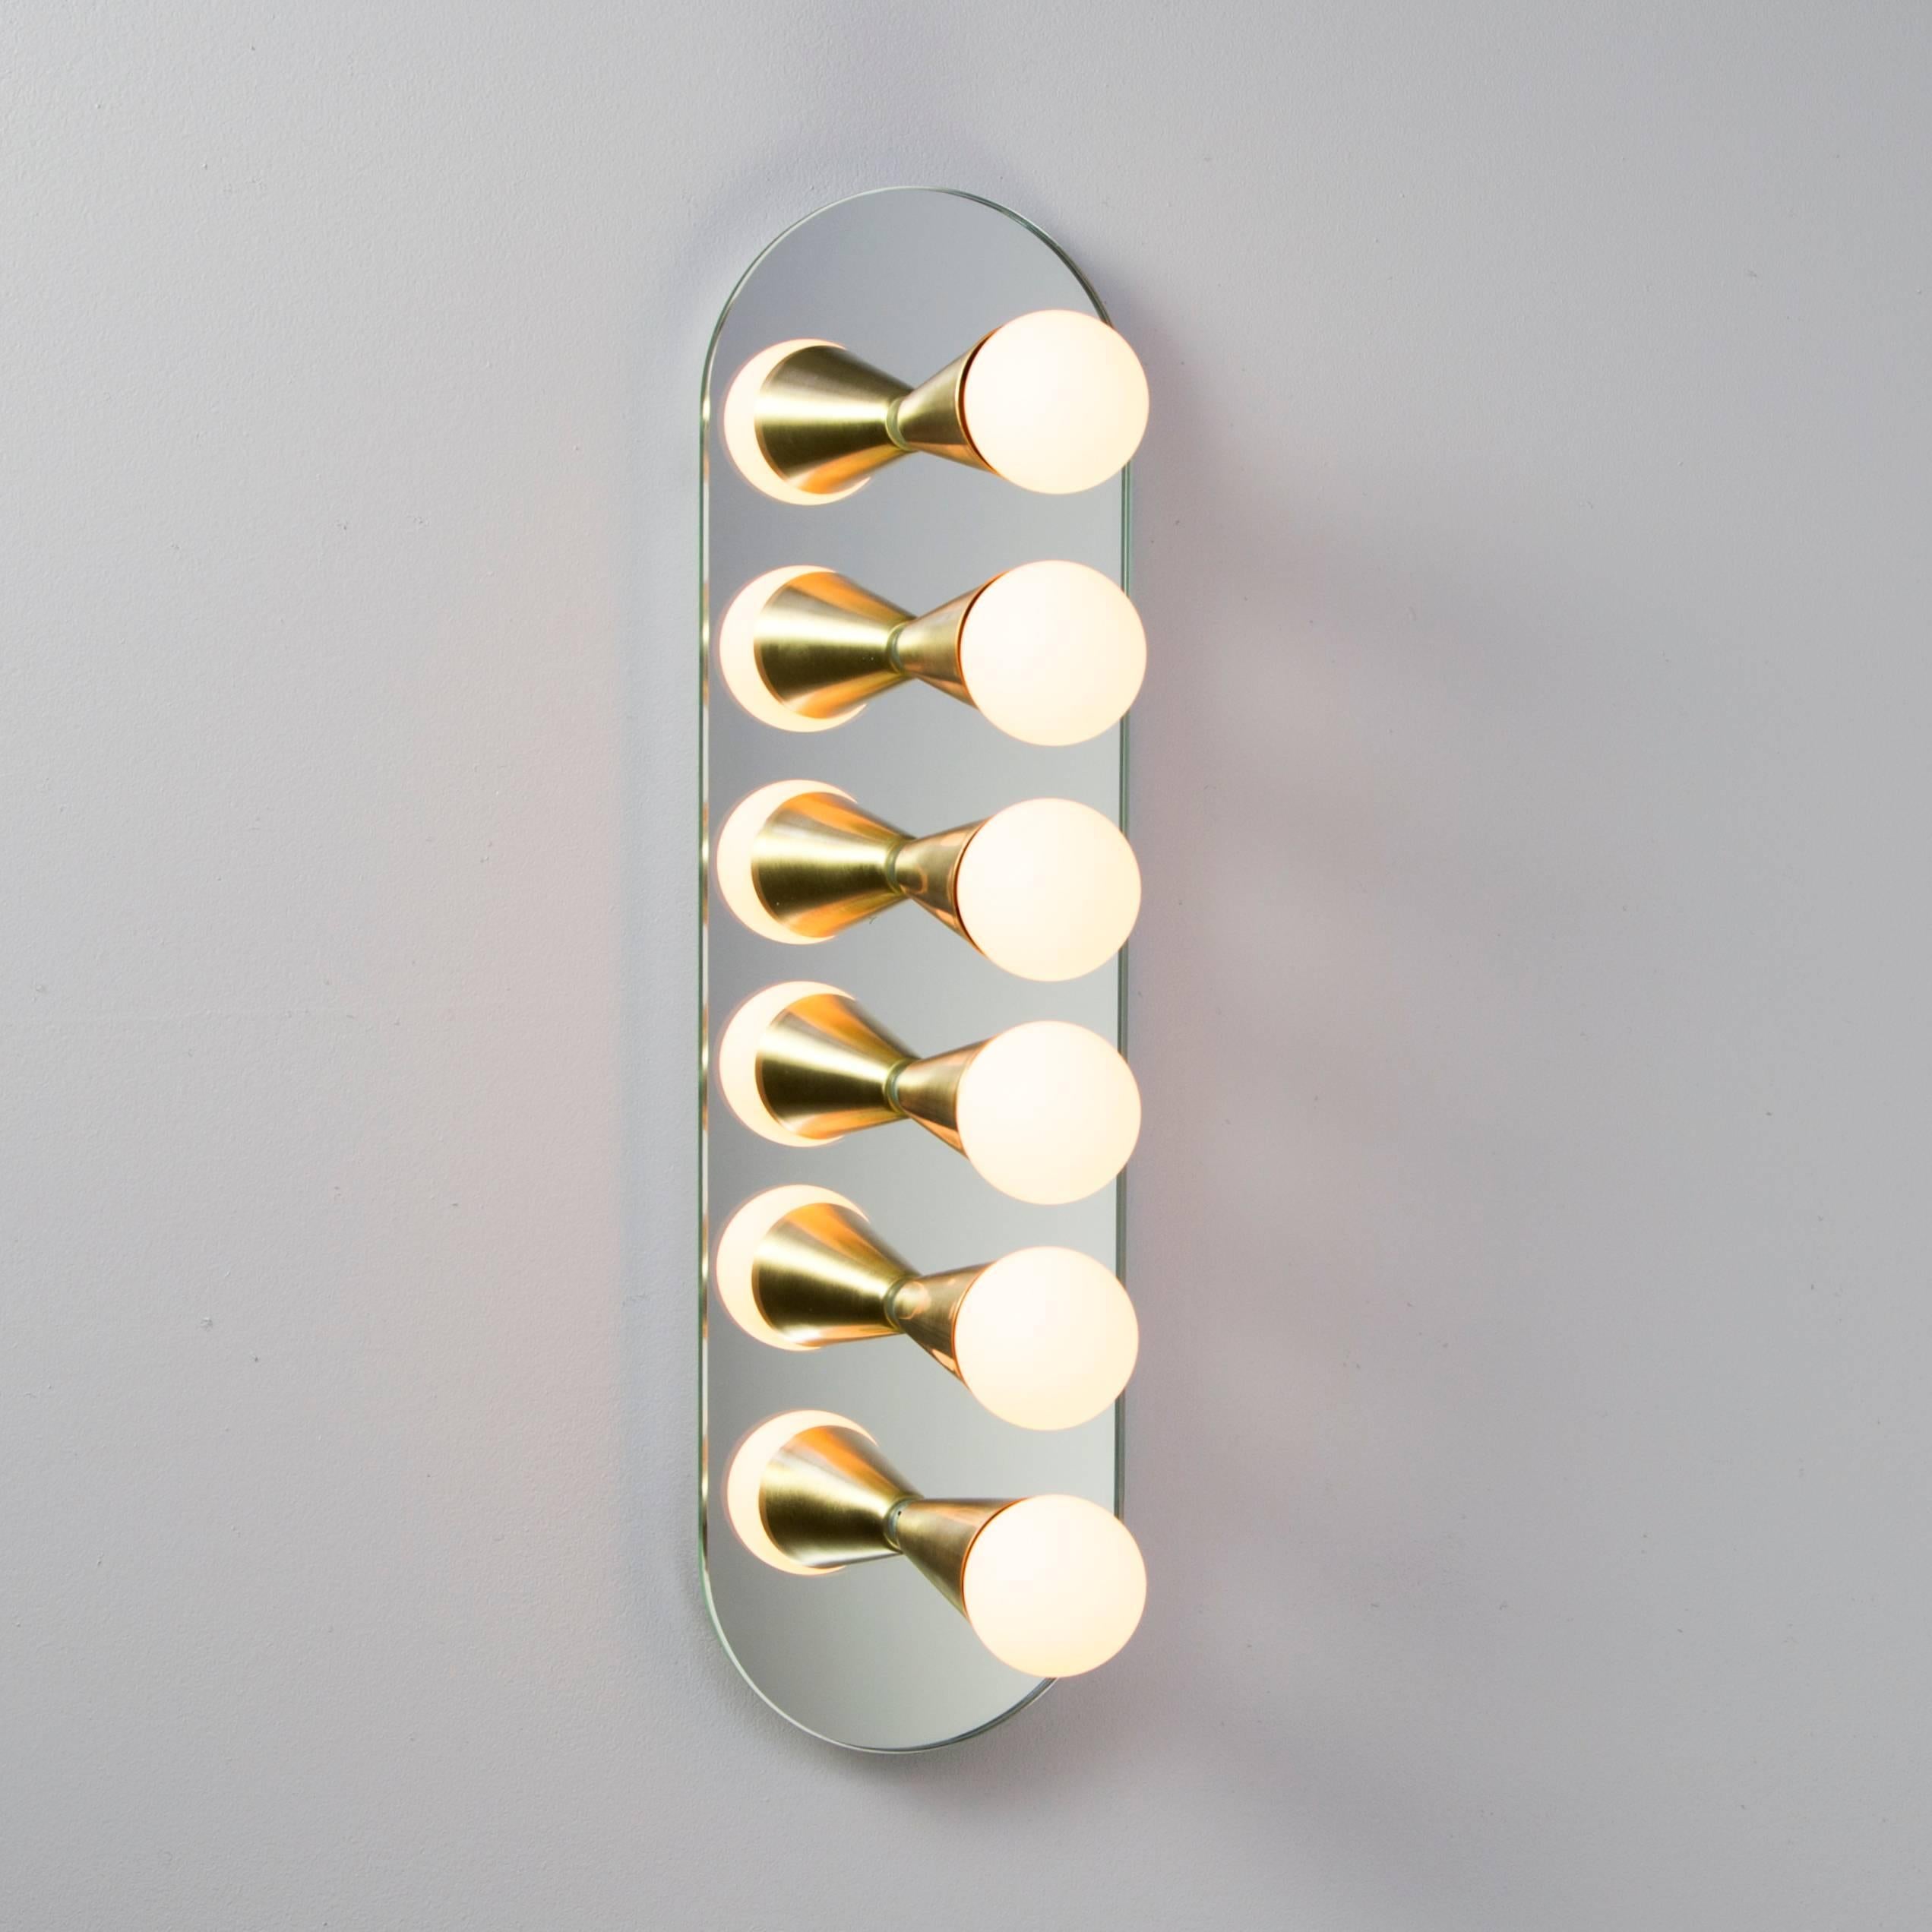 Simple, elegant and playful, the Echo Series is a line of surface-mount fixtures that can be used on a wall or ceiling. White or brass cones mount to mirrored glass to perfectly reflect each bulb, giving the illusion of lights floating in